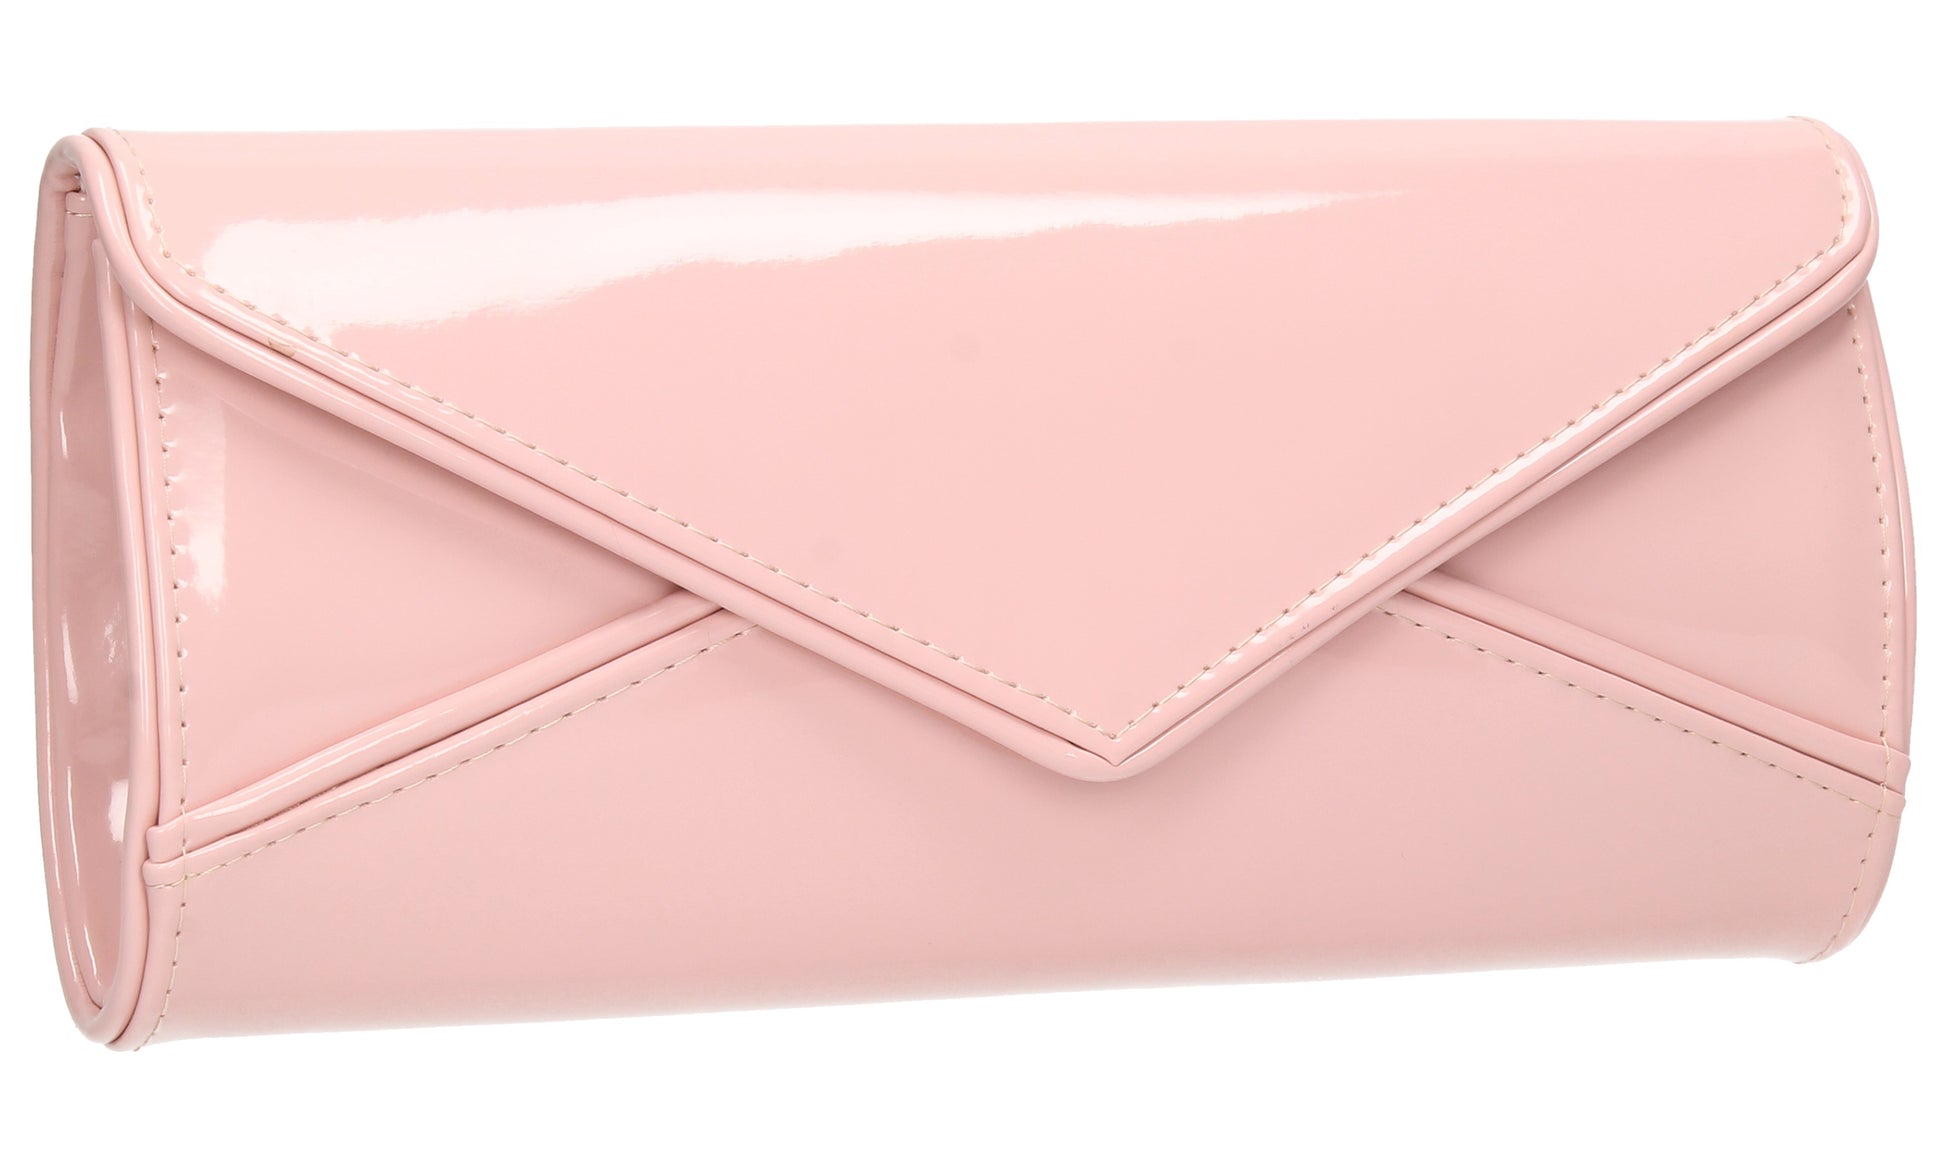 SWANKYSWANS Perry Patent Clutch Bag Blush Cute Cheap Clutch Bag For Weddings School and Work